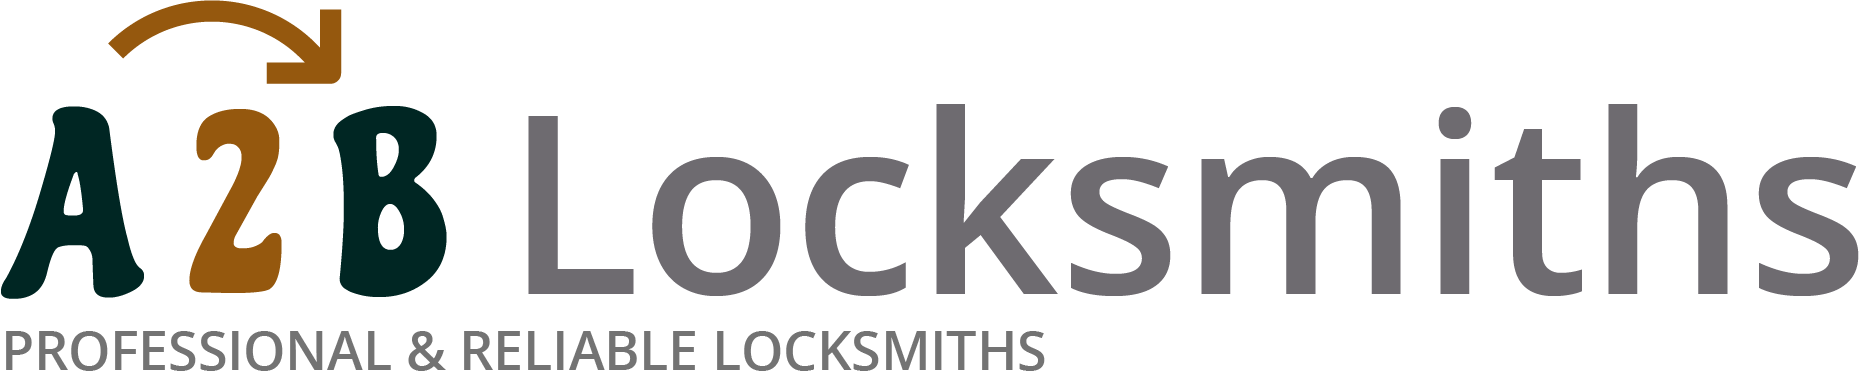 If you are locked out of house in Bletchley, our 24/7 local emergency locksmith services can help you.